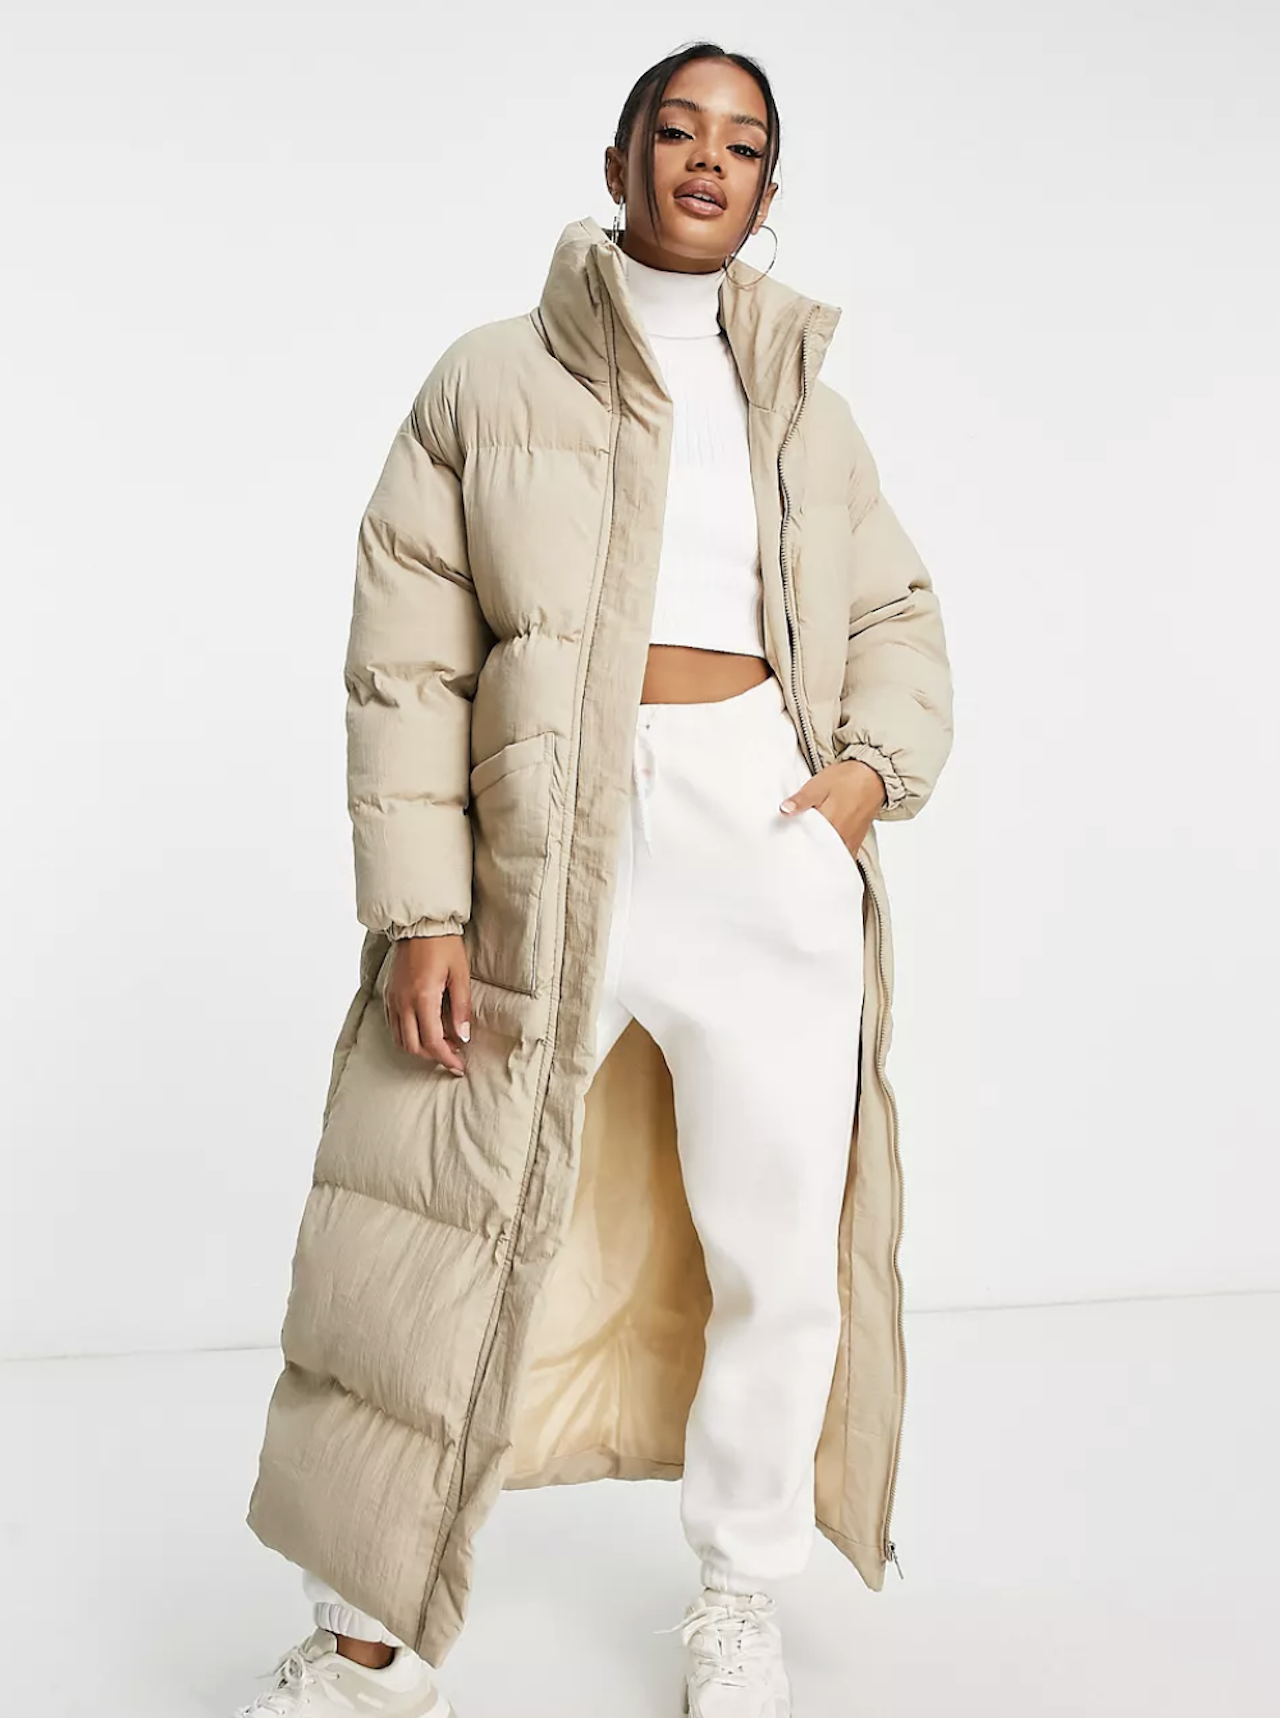 Stay Cozy Chic With These 8 Winter Coats Under $150